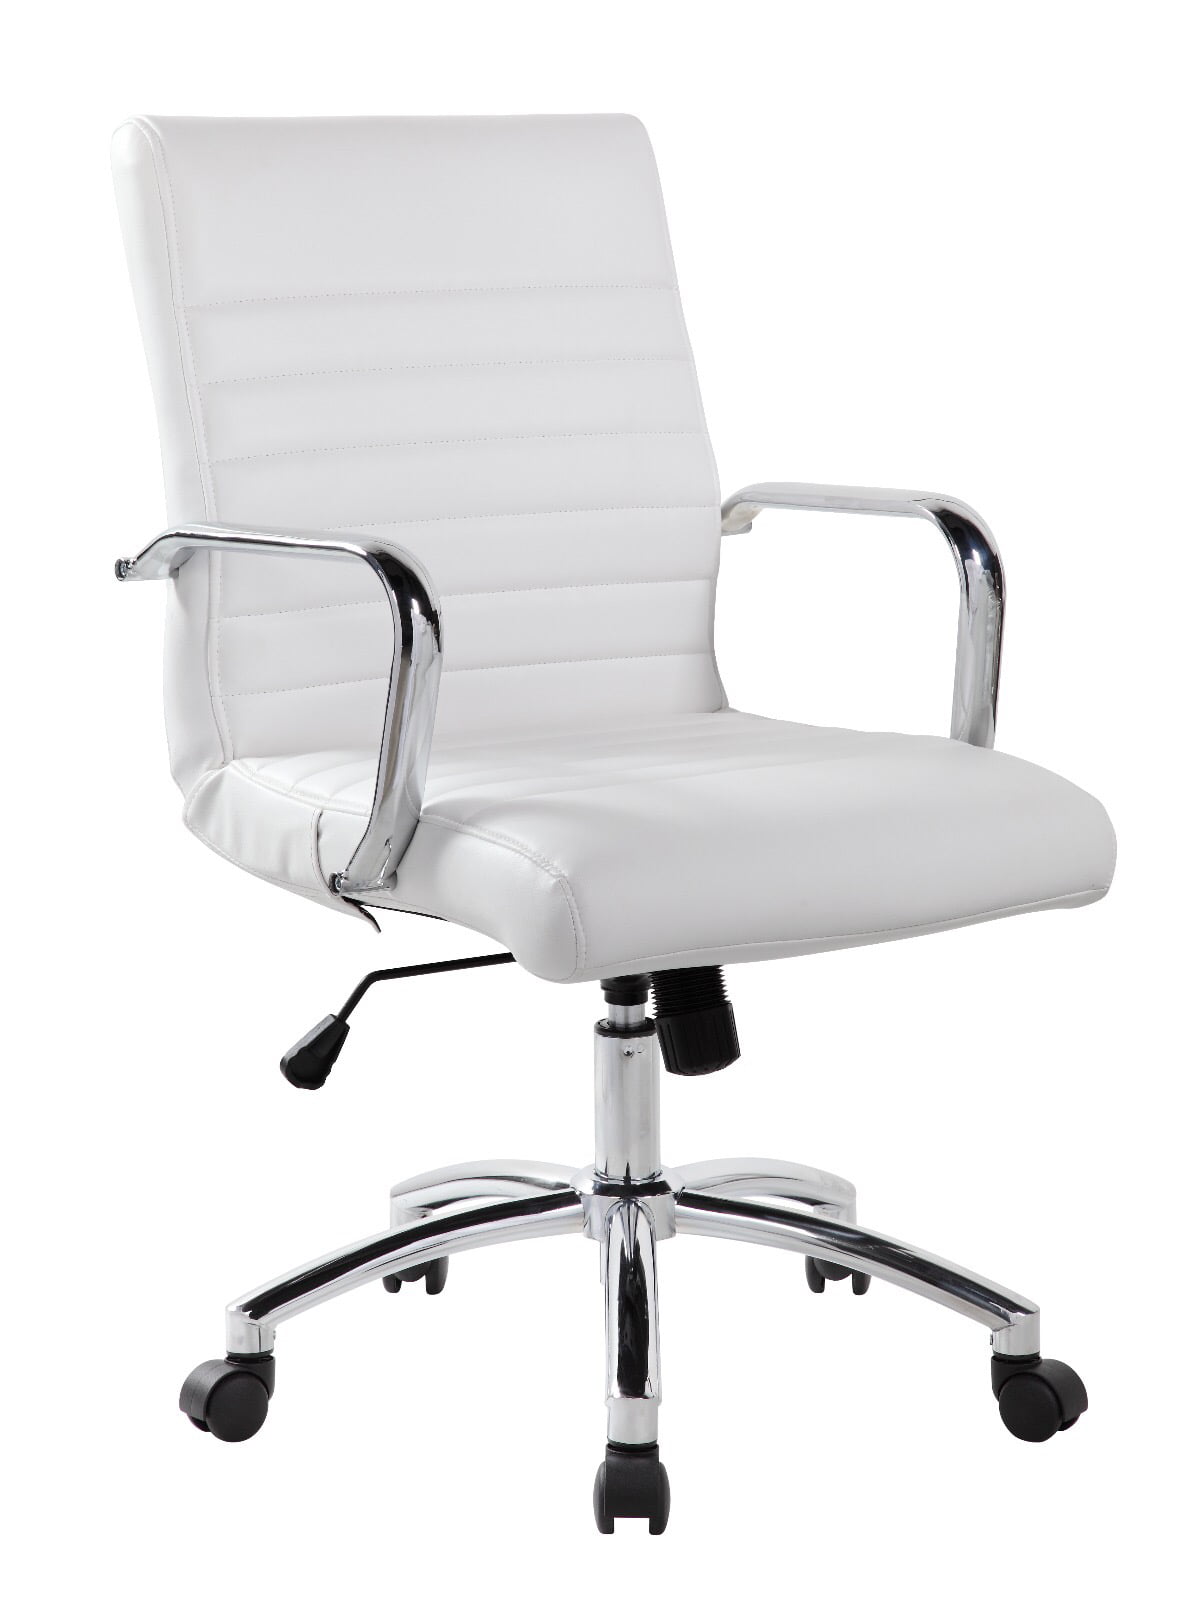 RealBiz Mid-Back Ribbed Faux Leather Office Chair, Pure White - Walmart